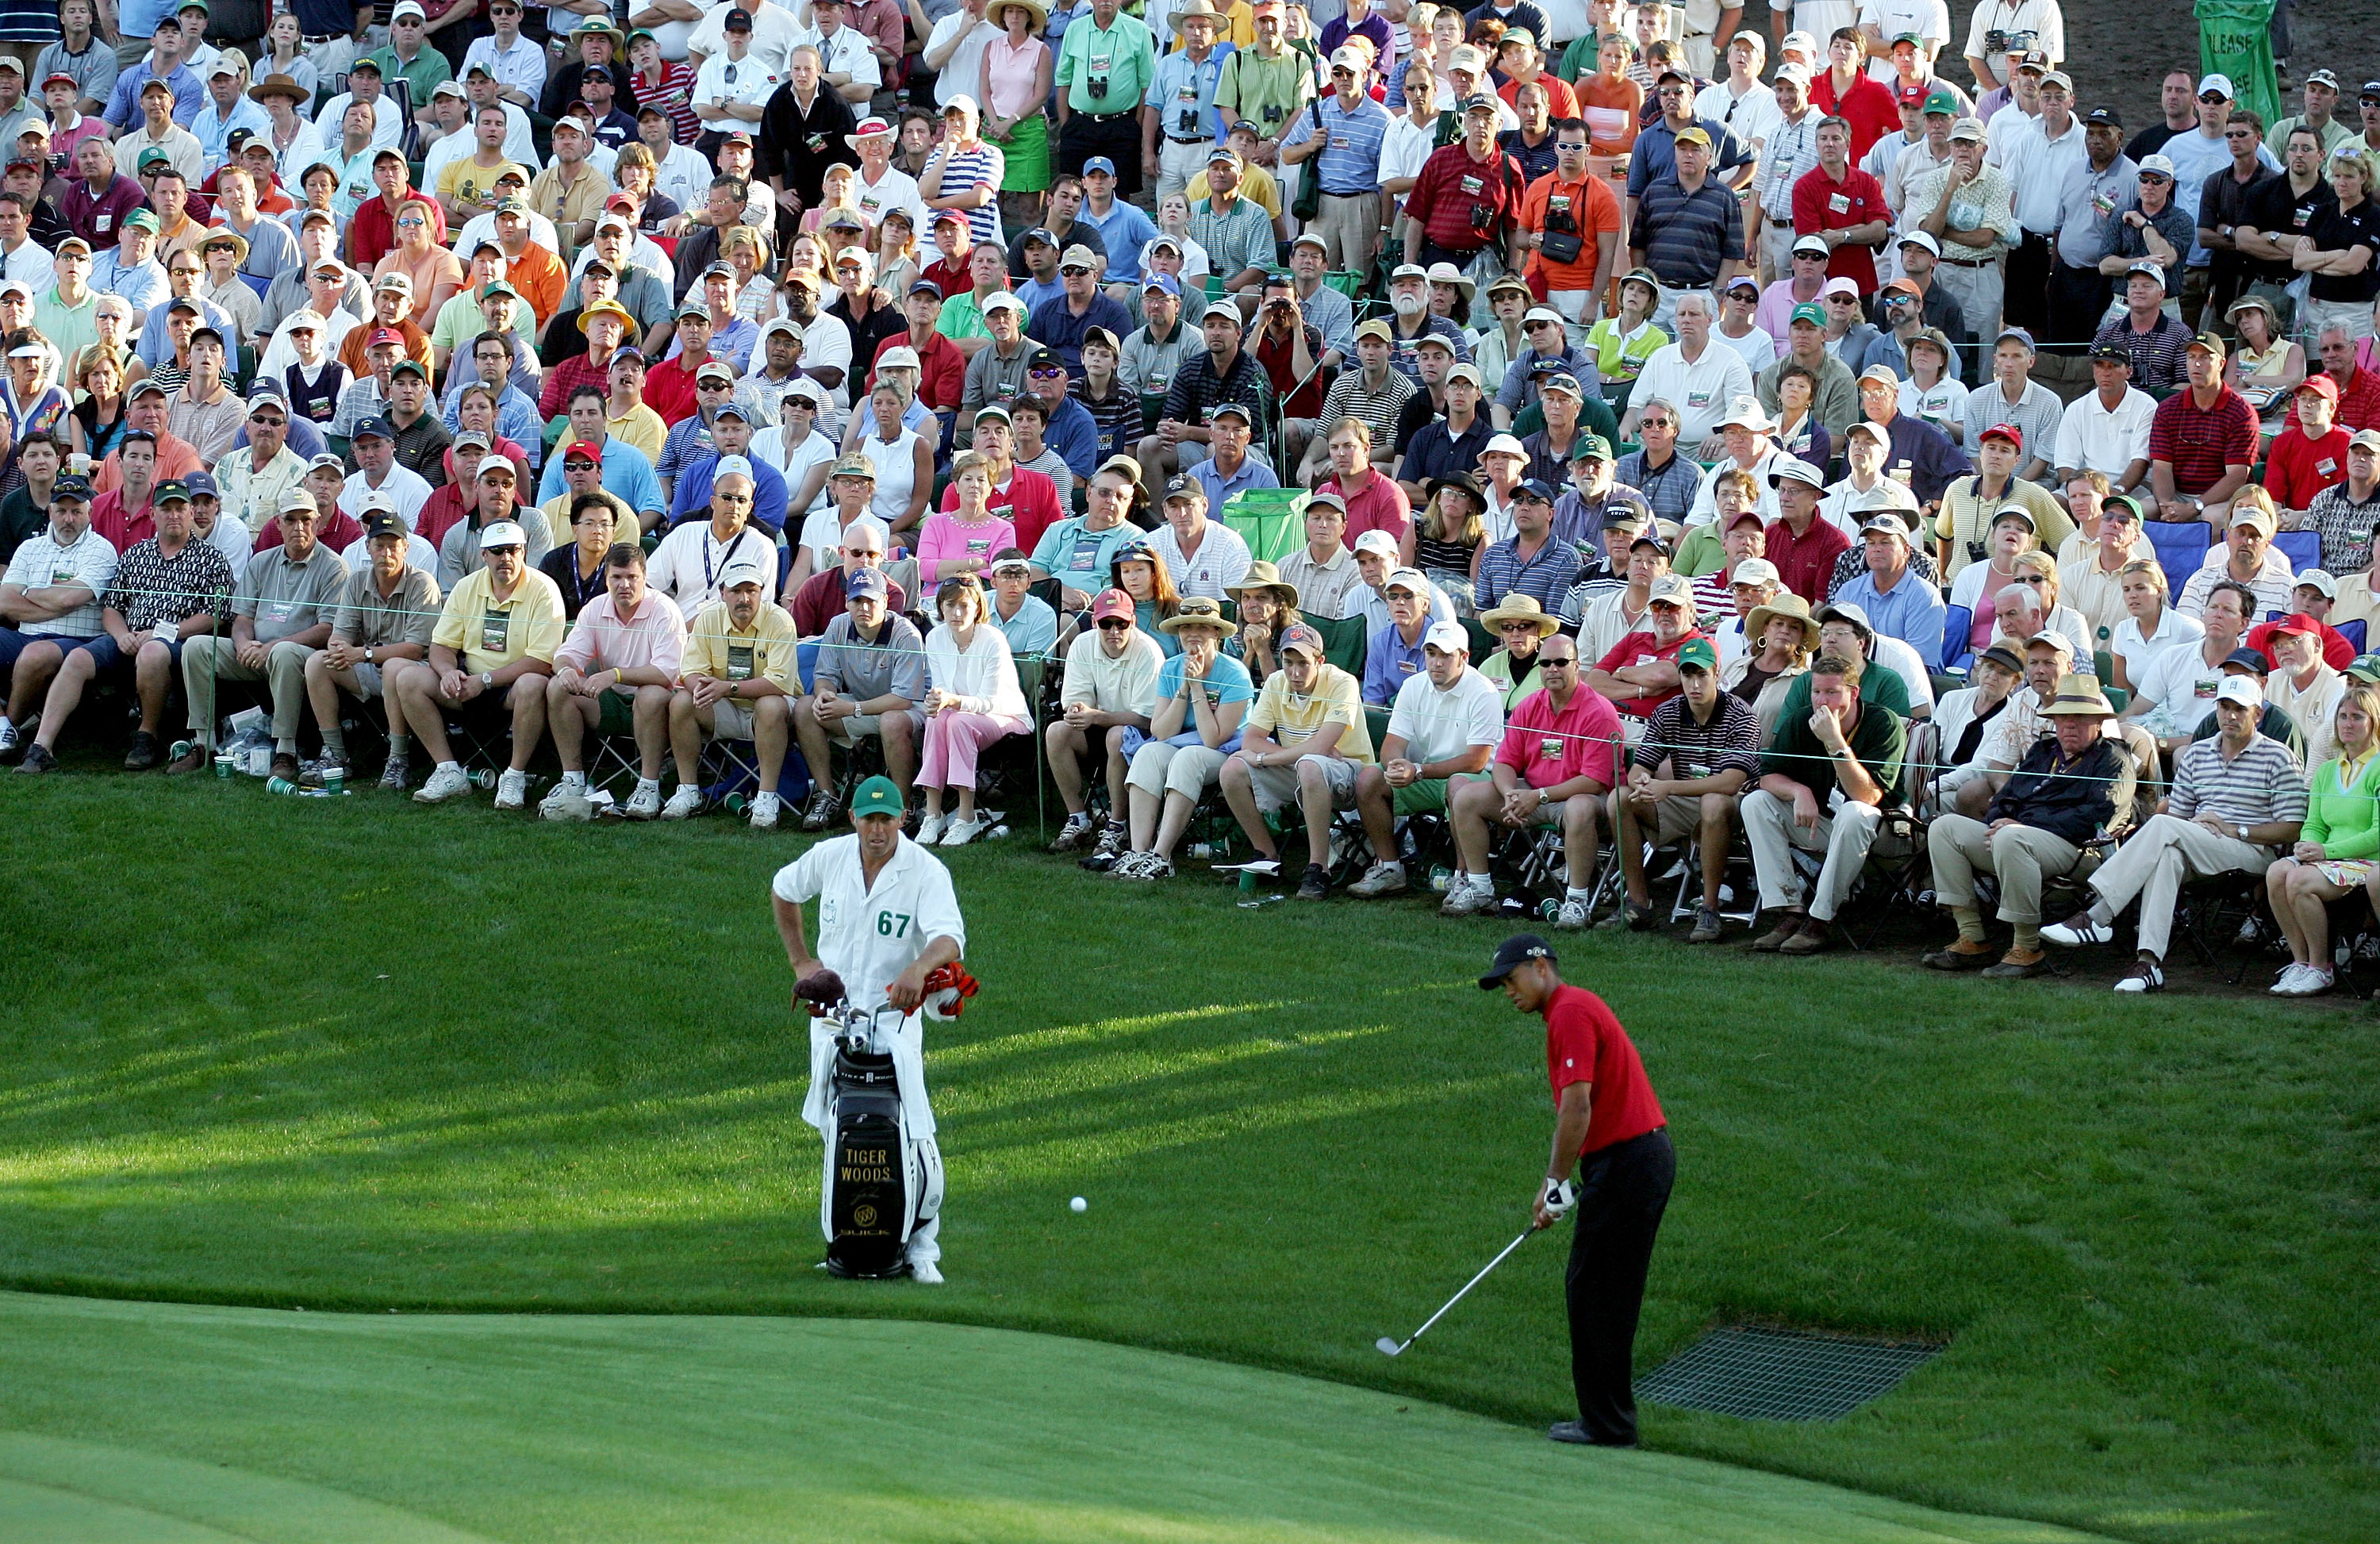 AUGUSTA, GA - APRIL 10:  Tiger Woods chips a shot to the 16th green for birdie as his caddie, Steve Williams, looks on during the final round of The Masters at the Augusta National Golf Club on April 10, 2005 in Augusta, Georgia.  (Photo by Harry How/Gett